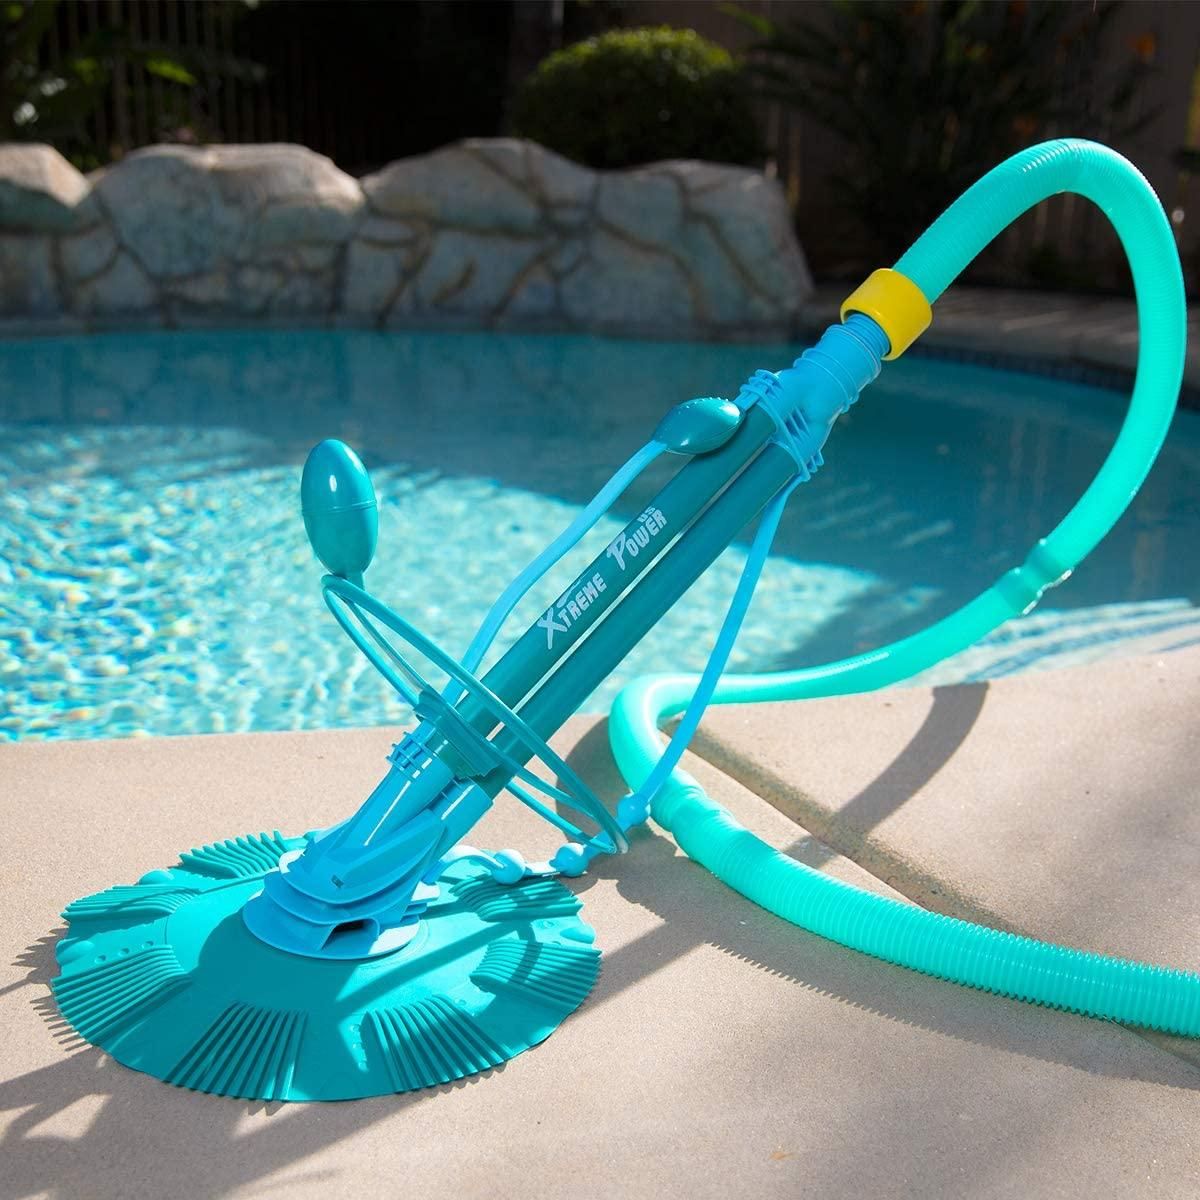 Xtremepower US 75037 Climb Wall Pool Cleaner Automatic Suction Vacuum-Generic, Blue ($199.99 Retail)